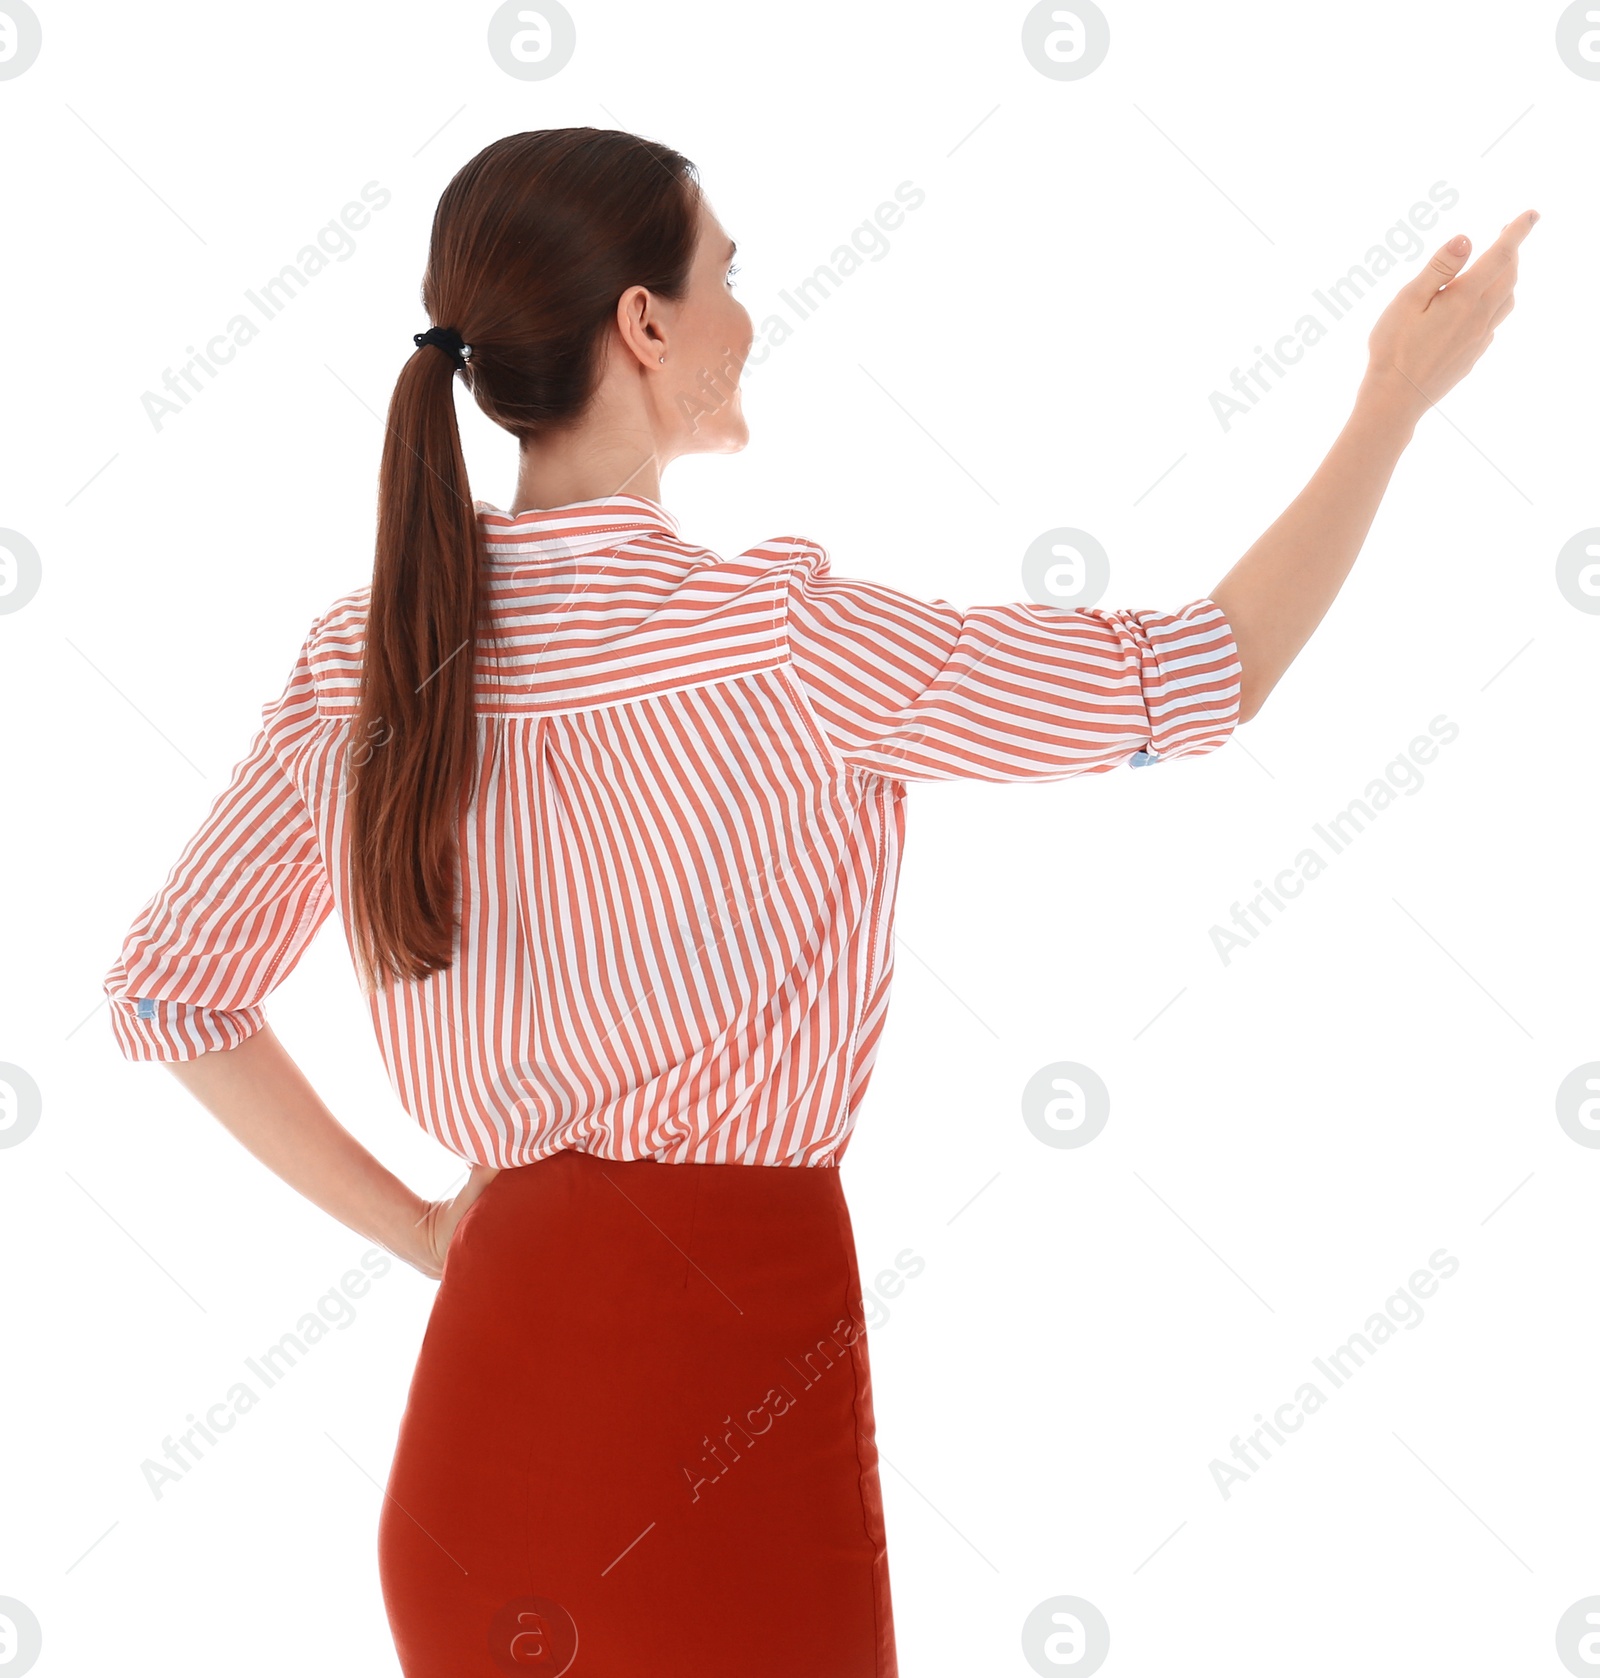 Photo of Professional business trainer showing at something on white background